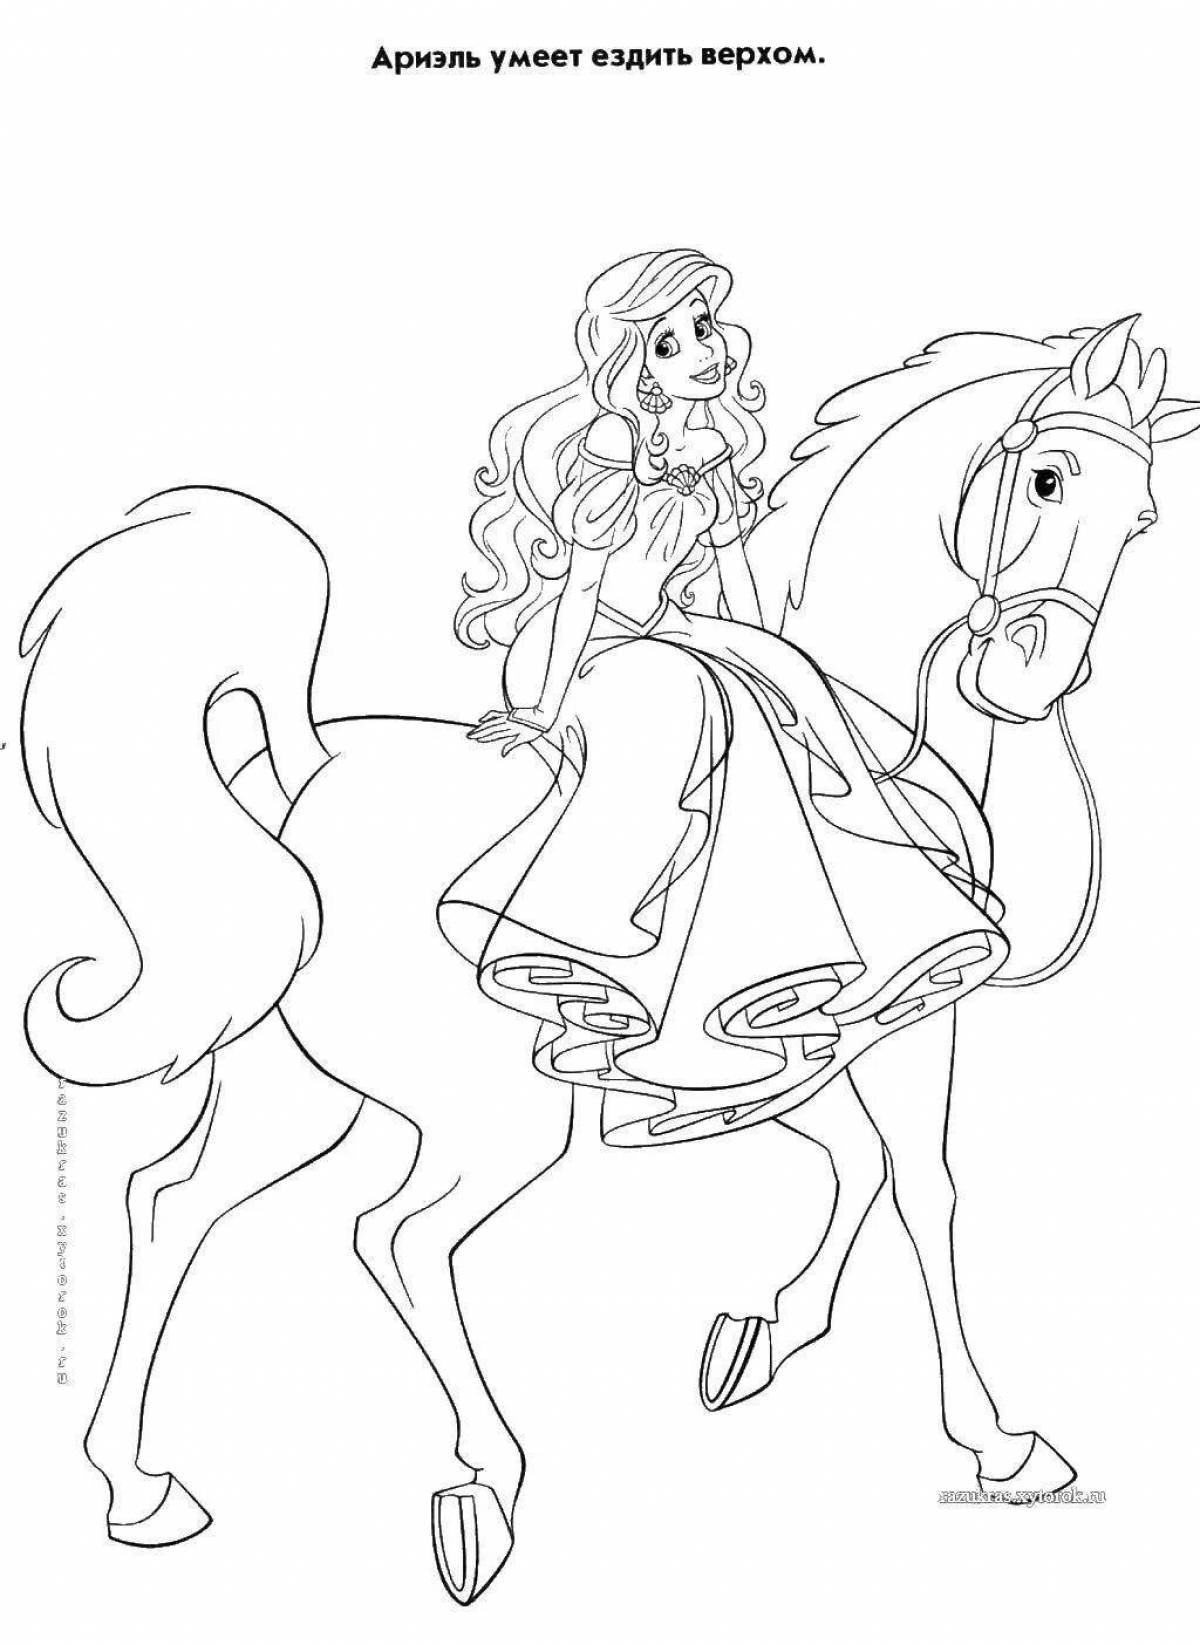 Amazing horse and princess coloring page